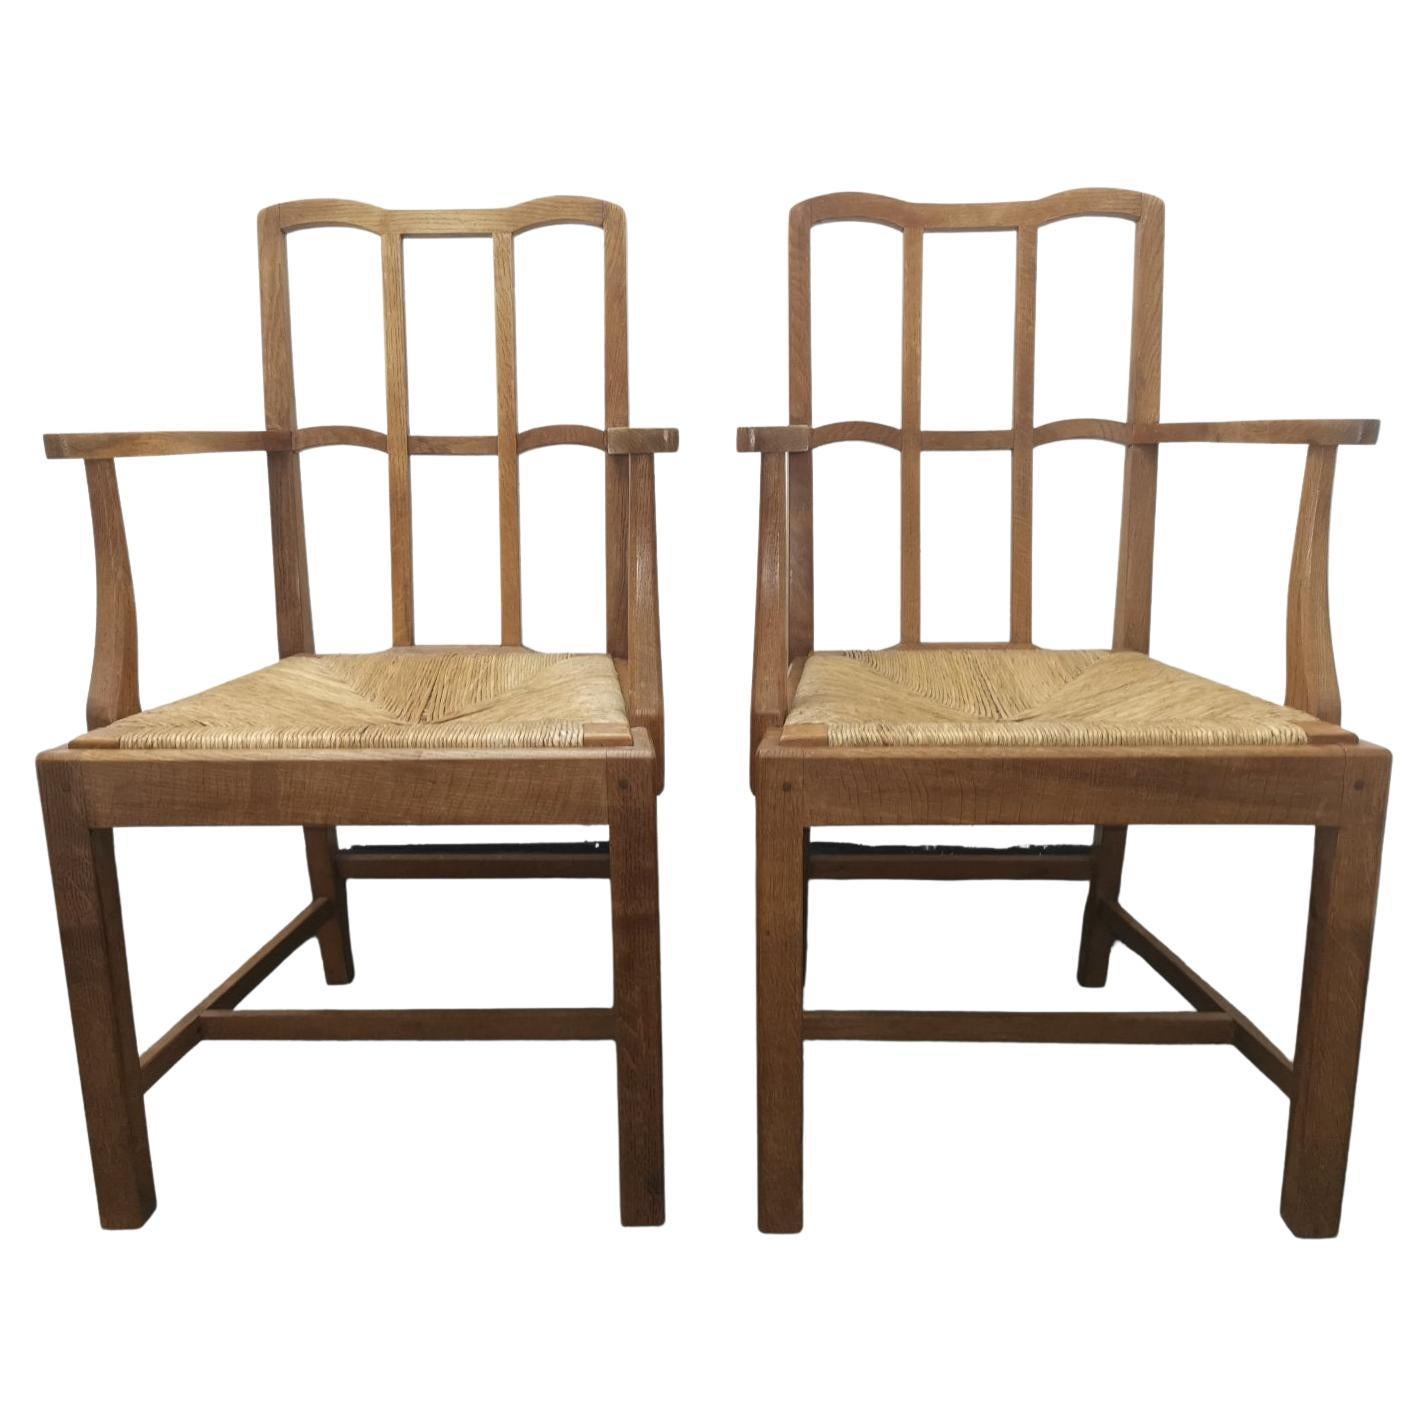 Pair of Cotswold School Arts & Crafts Oak Lattice Back Armchairs with rush Seats